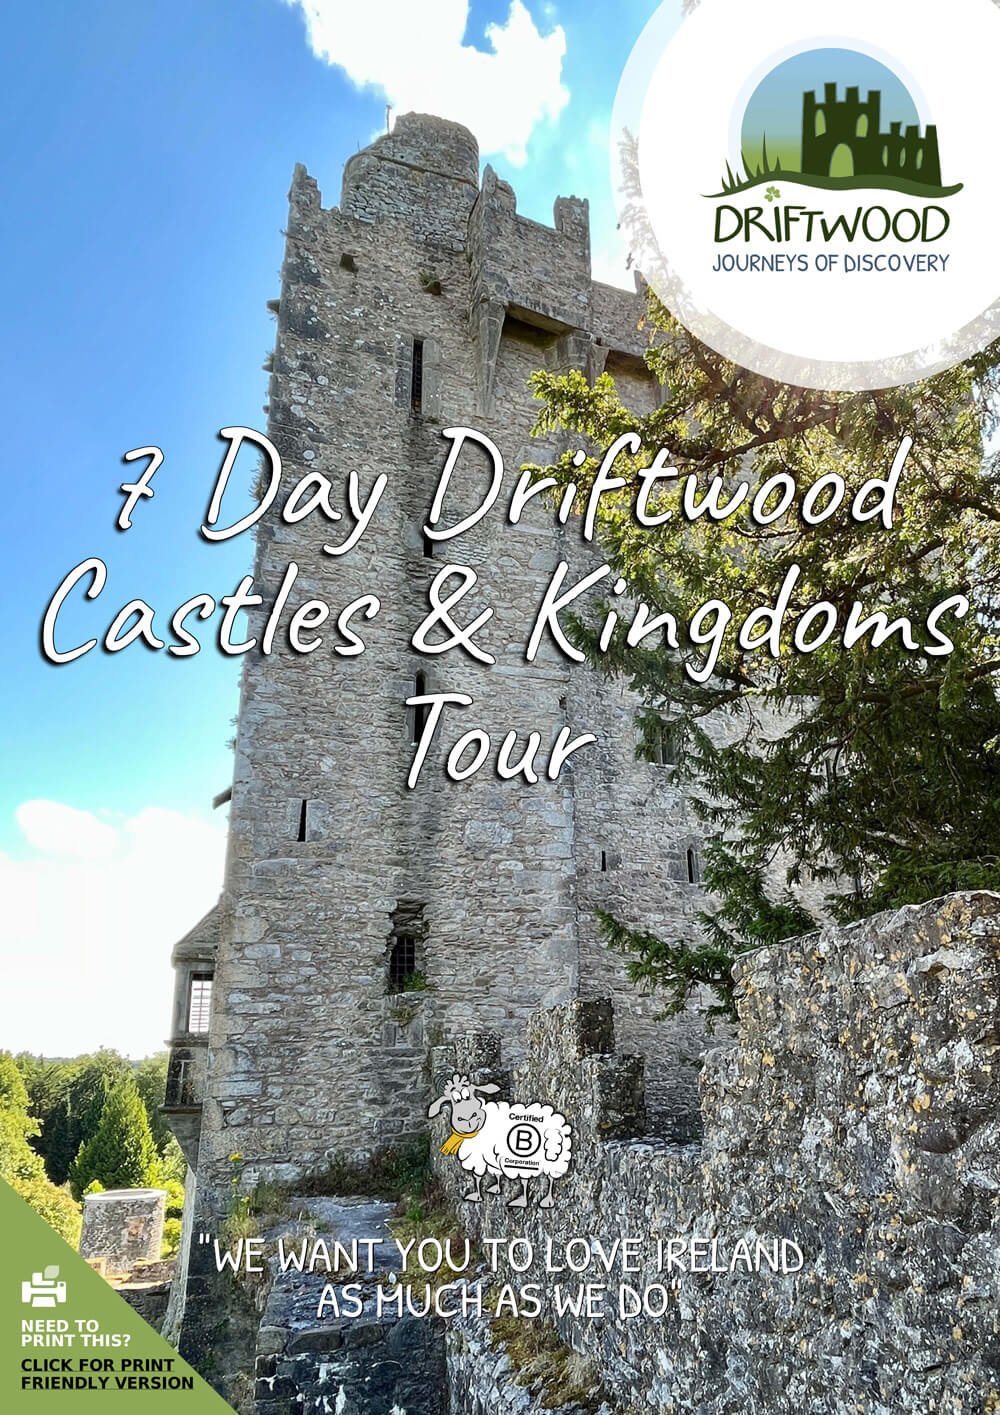 7 Day Driftwood Castles & Kingdoms Tour Itinerary cover image with Blarney Castle in Ireland